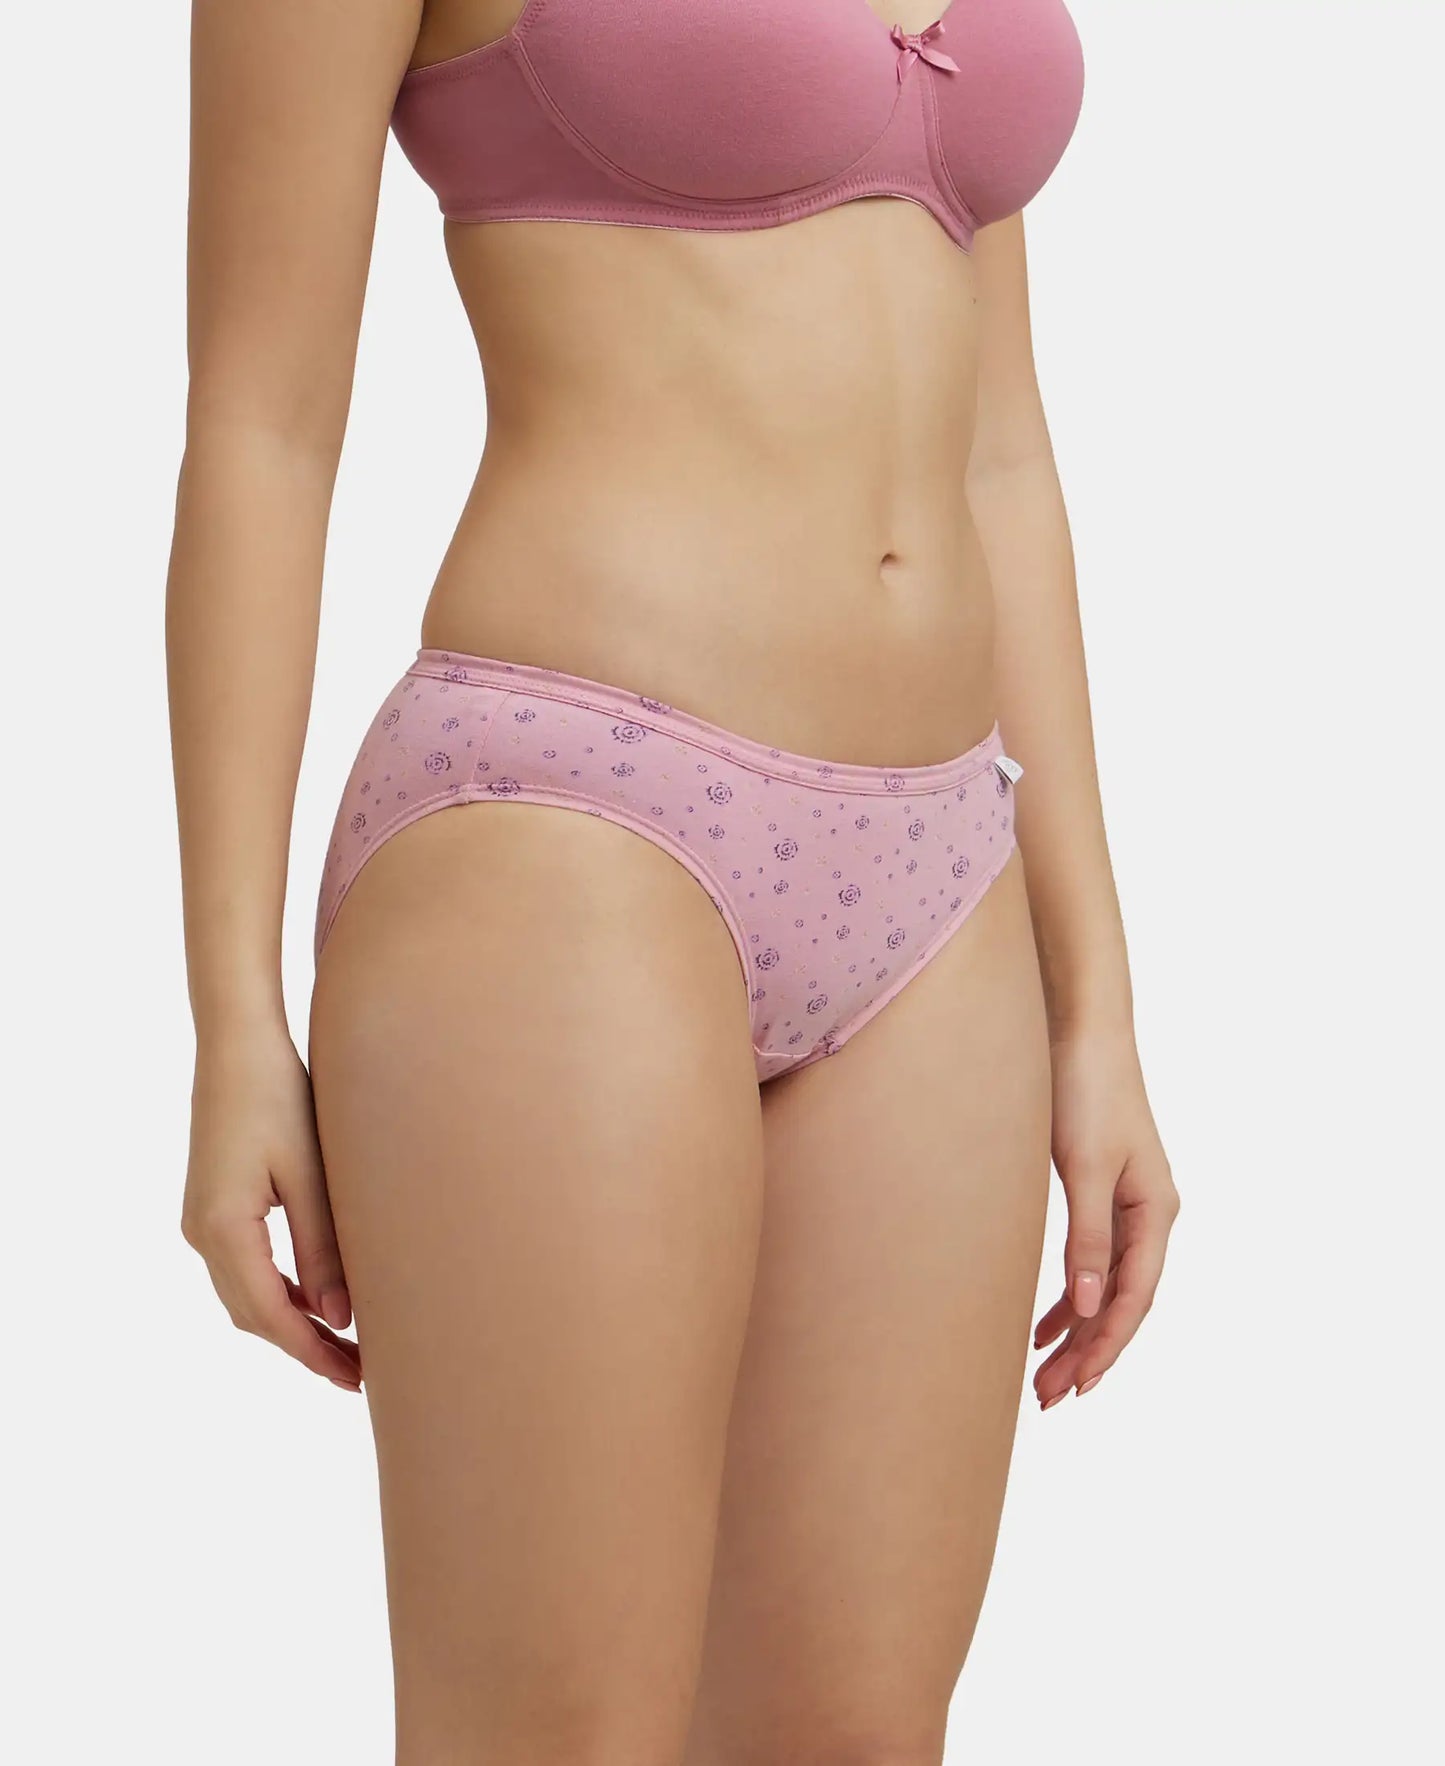 Medium Coverage Super Combed Cotton Bikini With Concealed Waistband and StayFresh Treatment - Light Prints-5